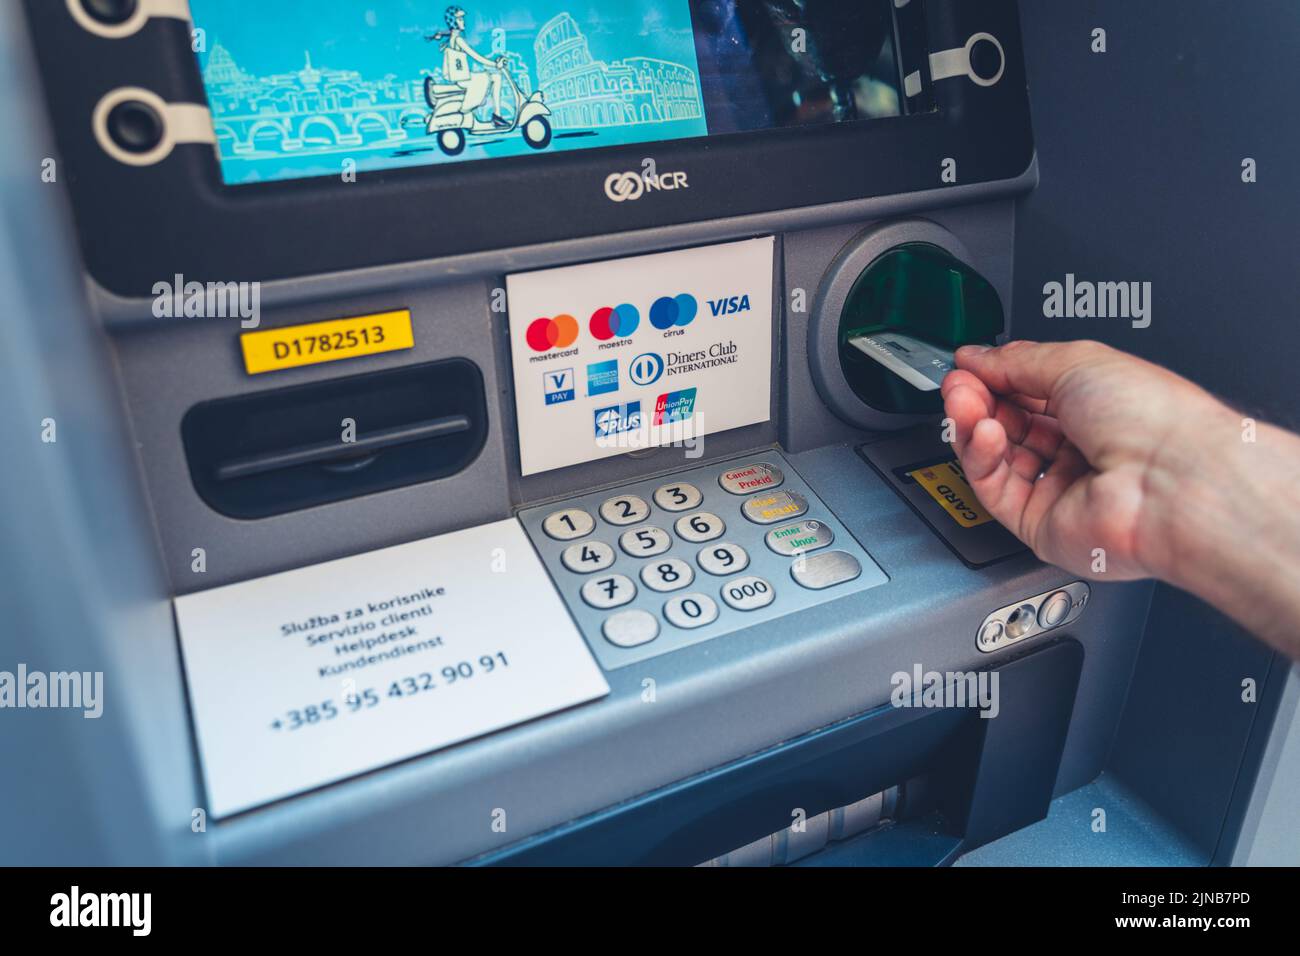 Croatia - 26 July 2022: A Man Slides A Mastercard Credit Card Into An ATM To Withdraw Cash From His Account. Withdraw Money Abroad Stock Photo